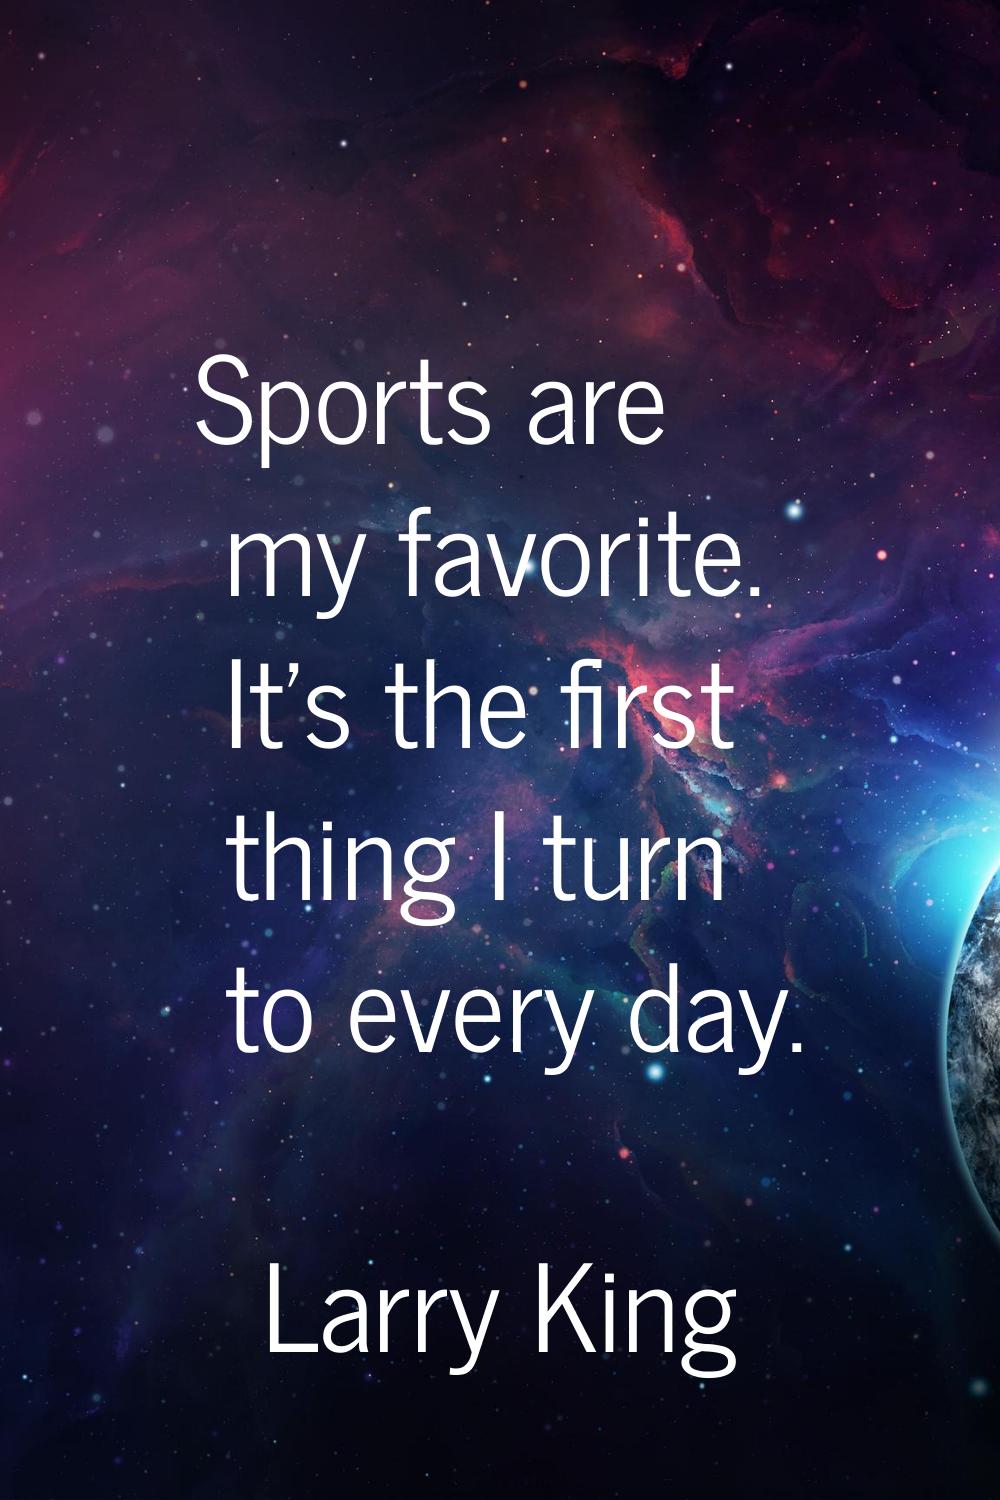 Sports are my favorite. It's the first thing I turn to every day.